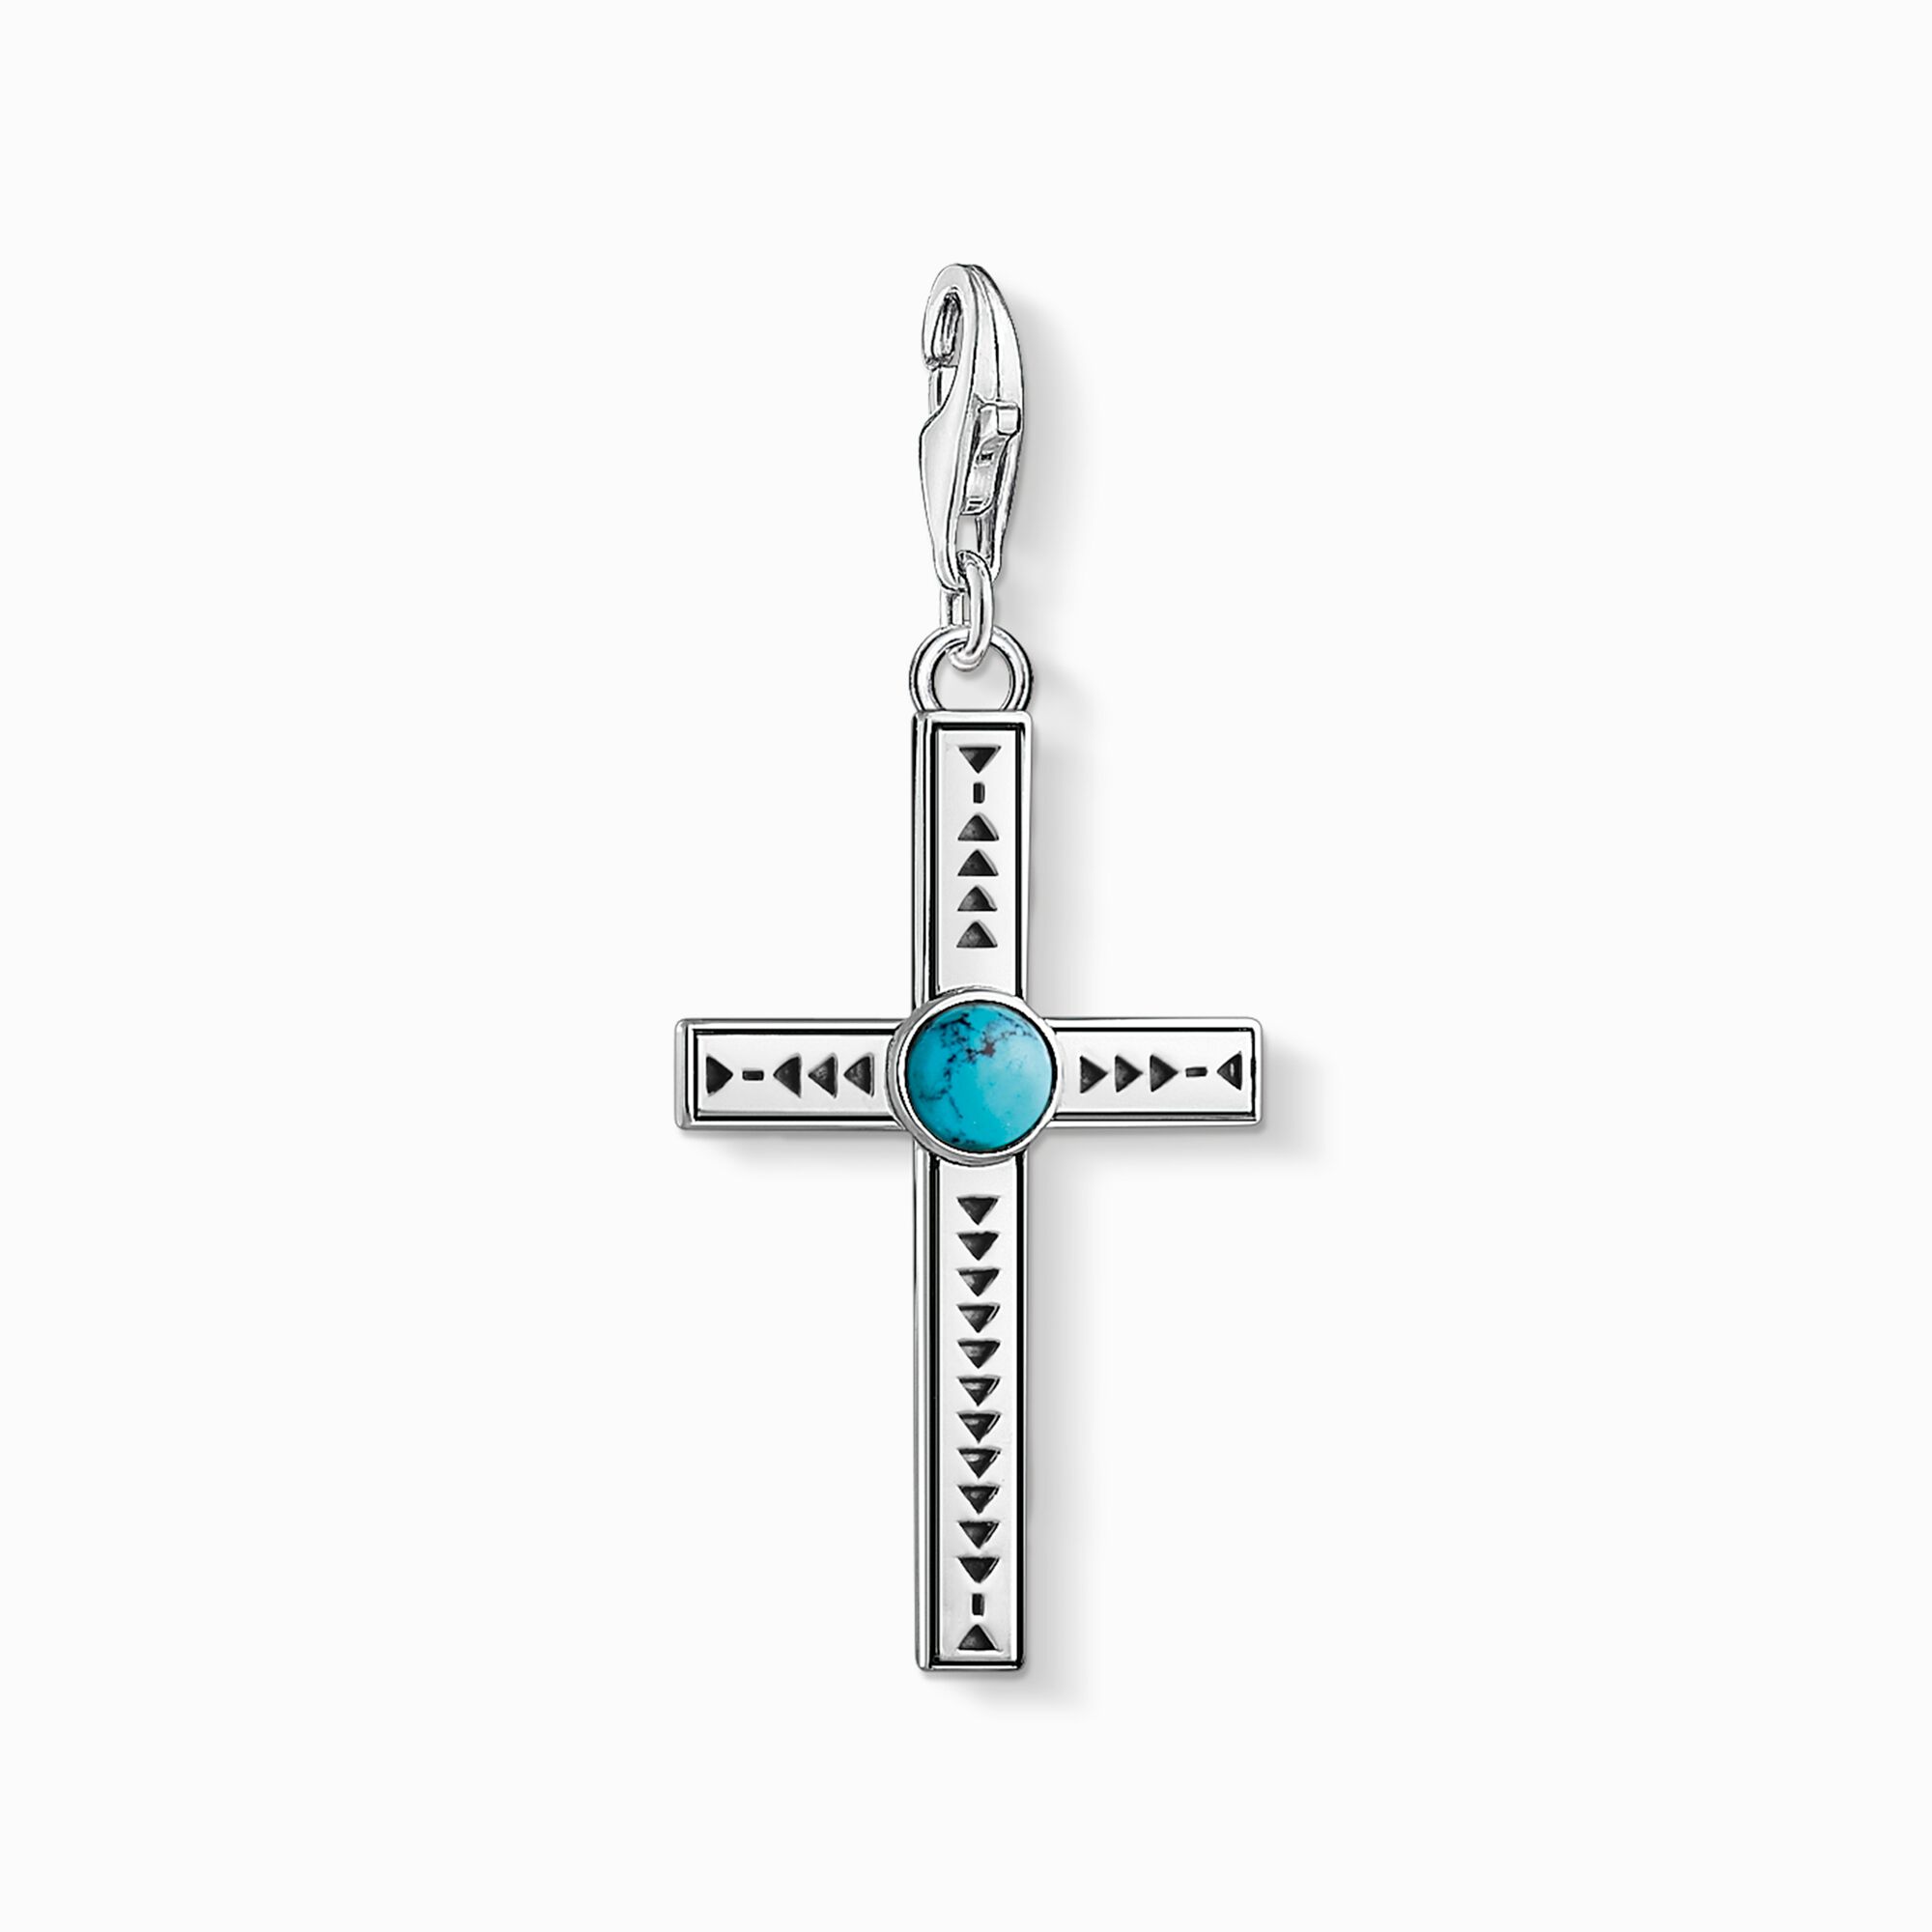 Charm pendant Ethnic Cross Turquoise from the Charm Club collection in the THOMAS SABO online store